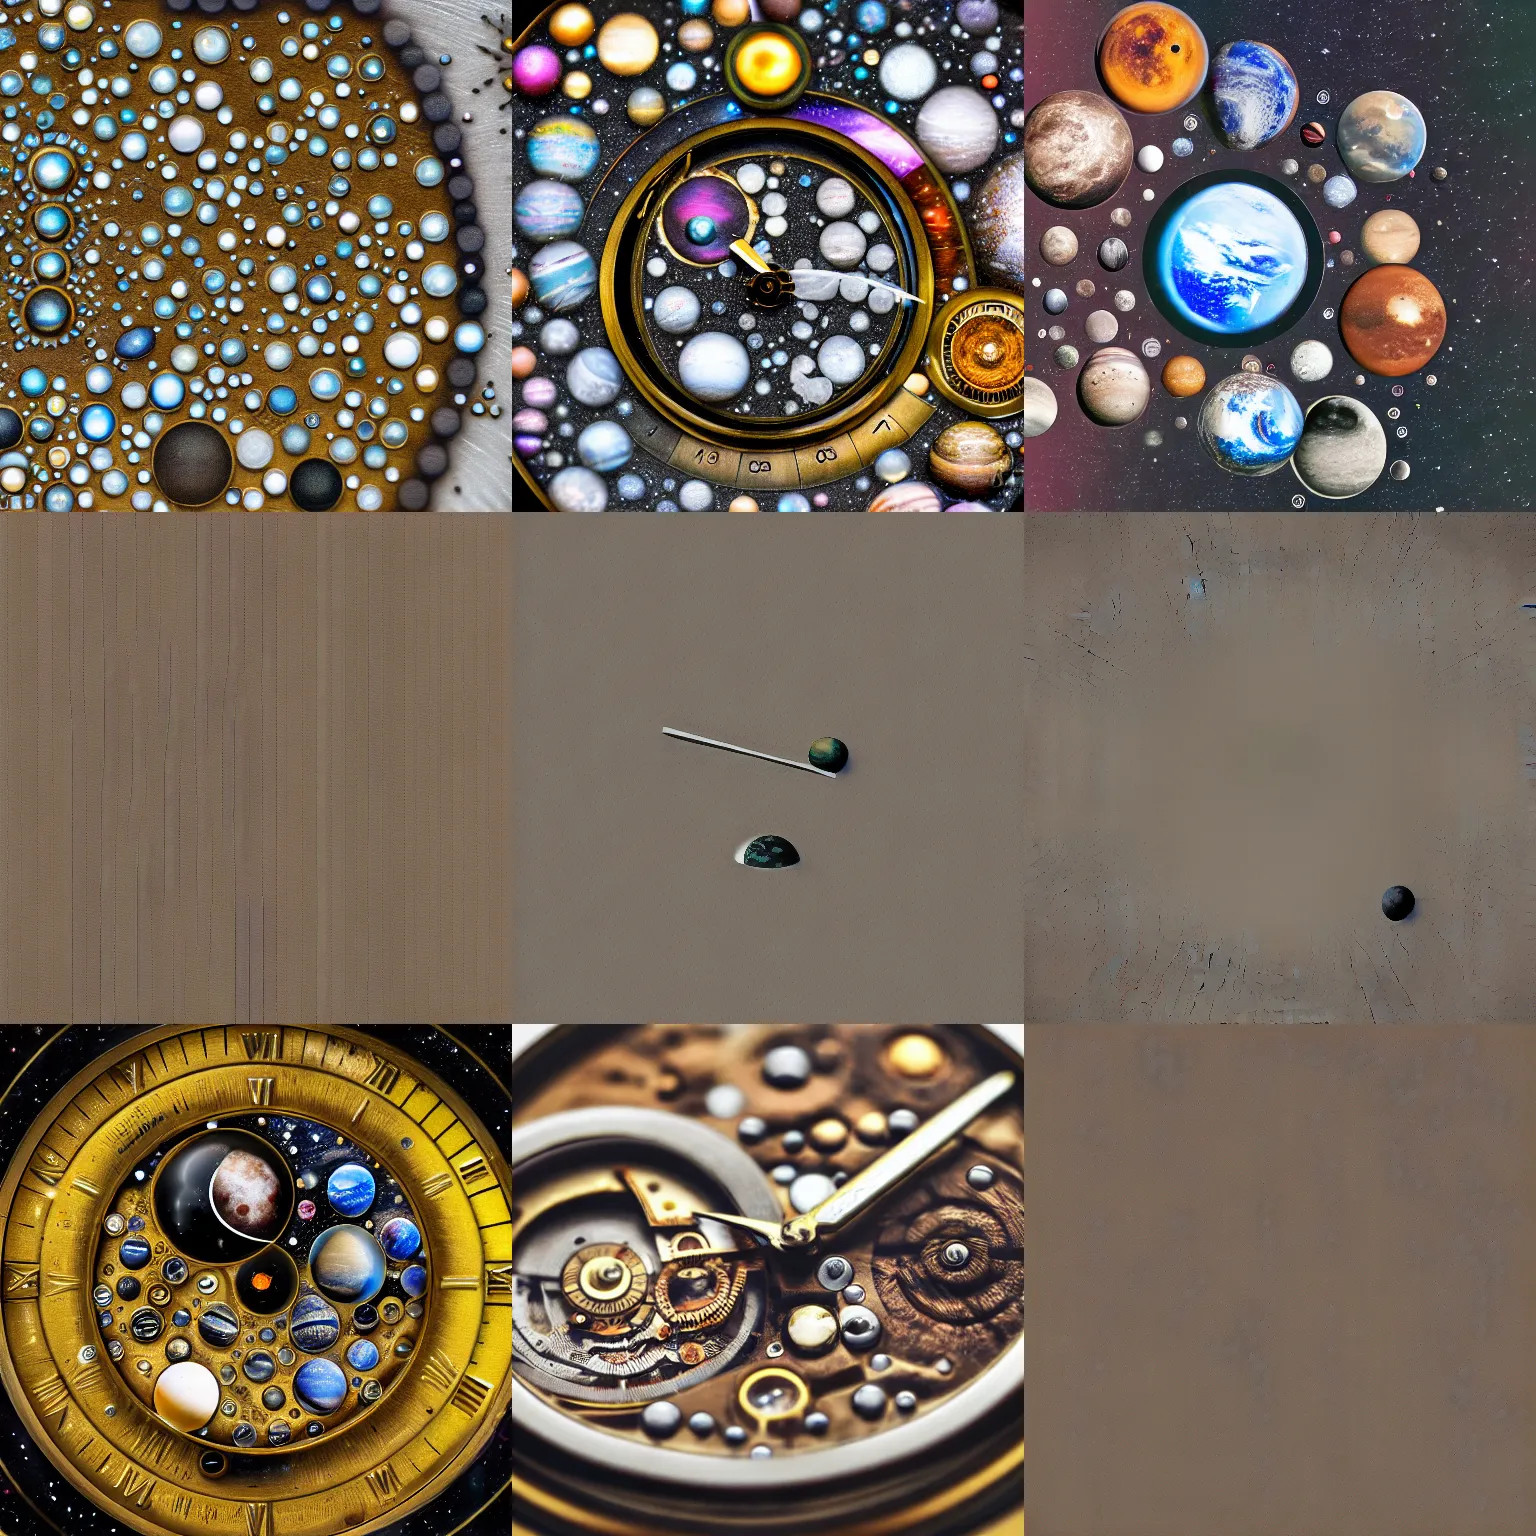 Prompt: Macro photograph of a watch made of planets, moons, miniature cosmos, complexity